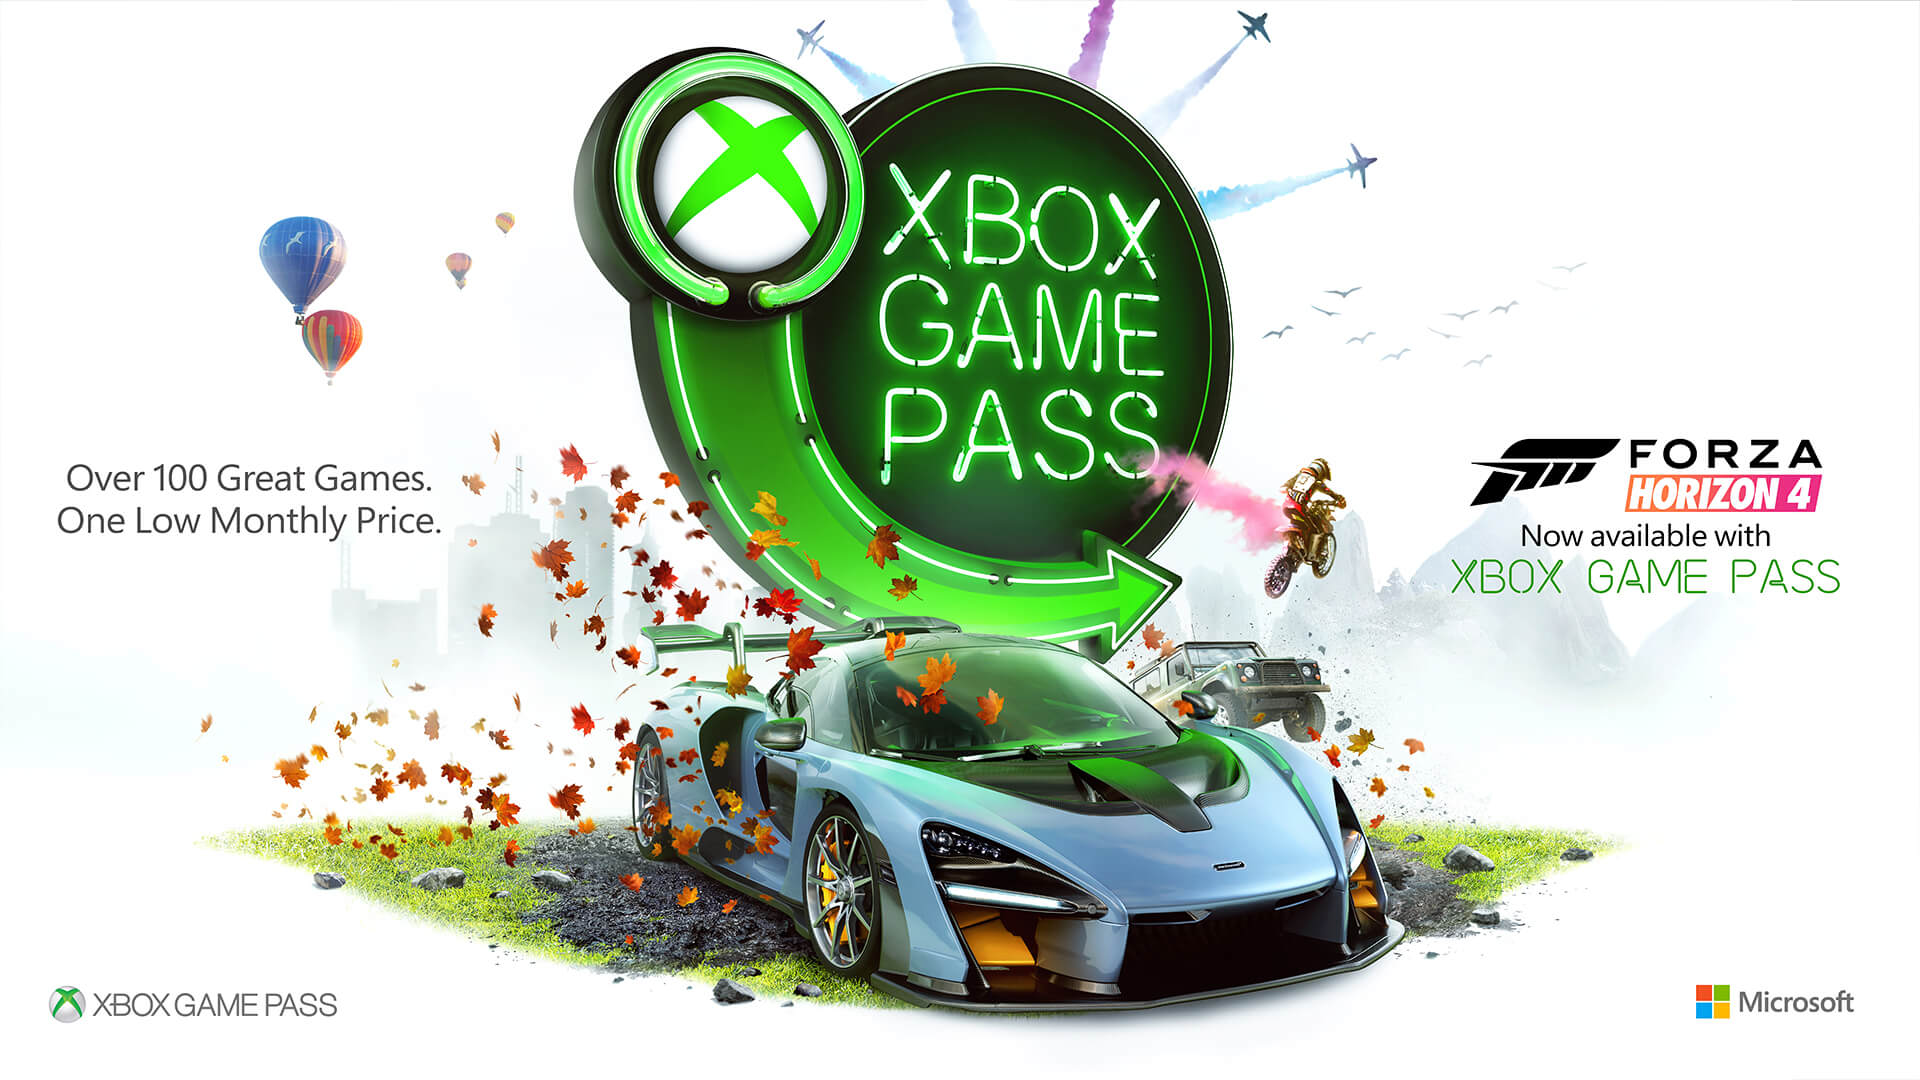 upgrade to xbox game pass ultimate for $1